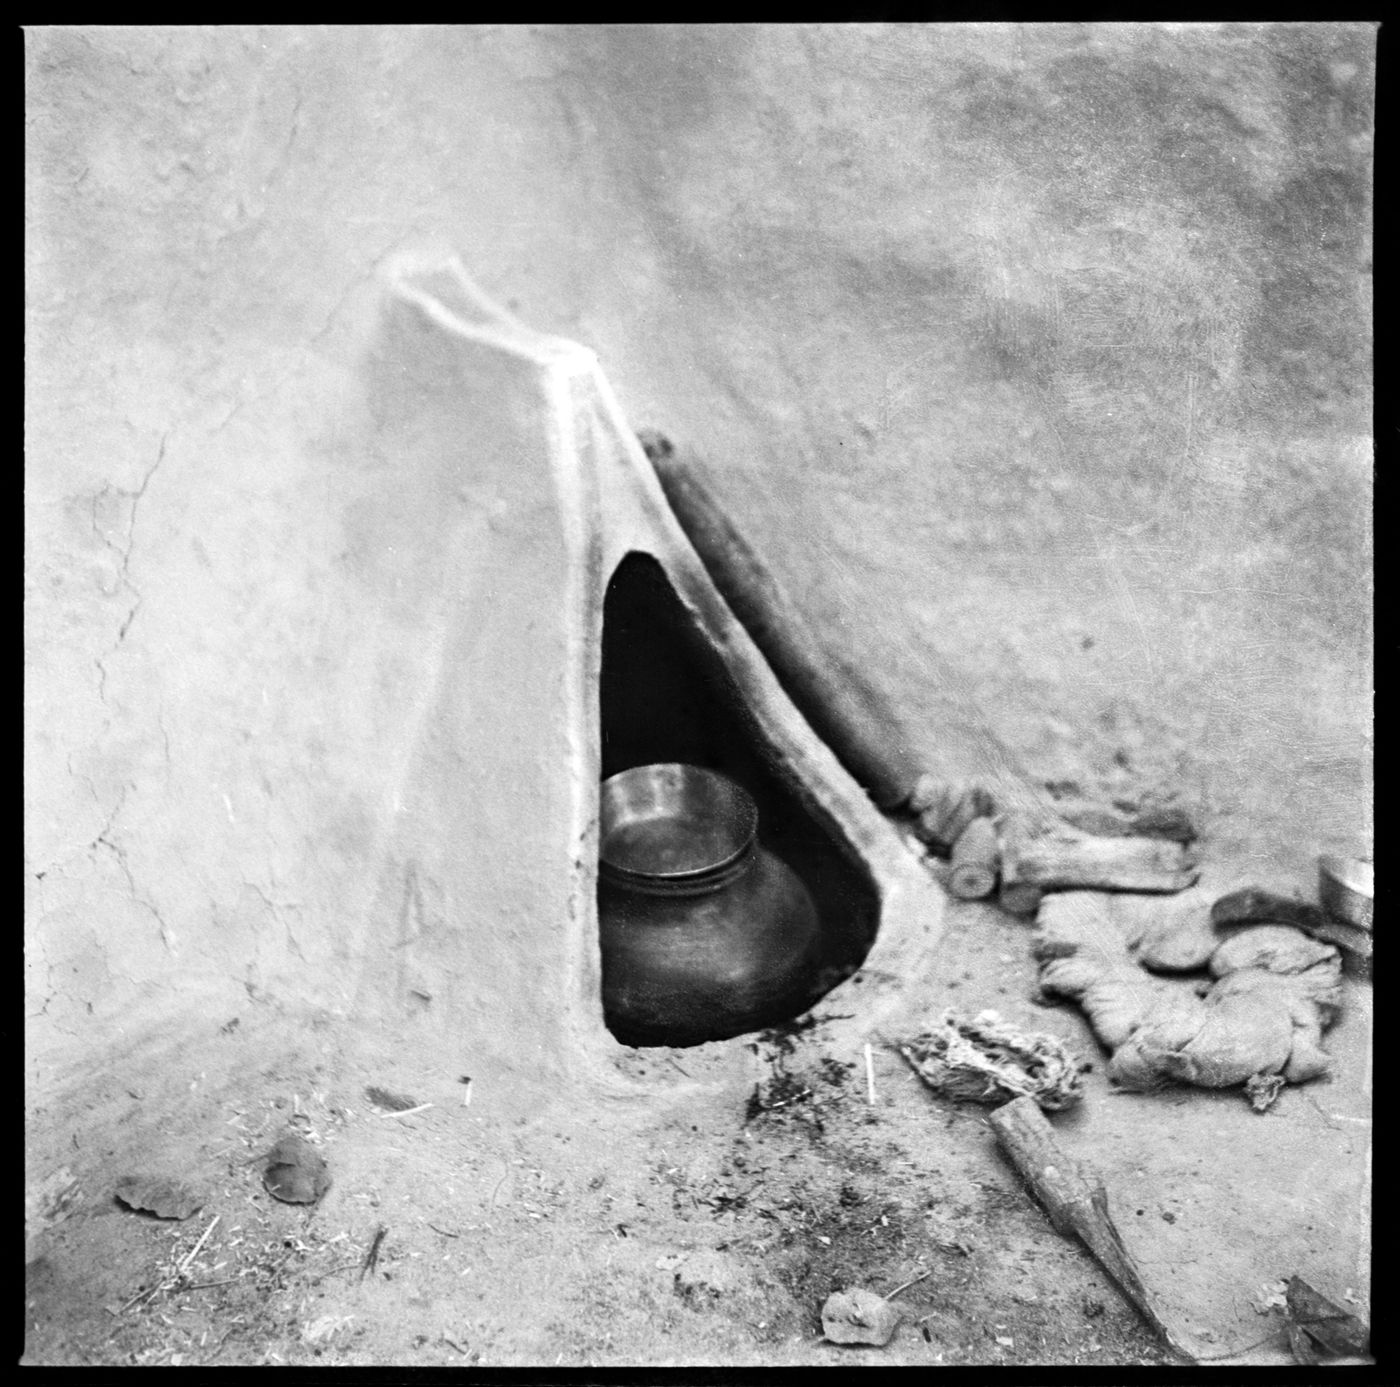 View of a pot in a cook stove, possibly in Chandigarh, India